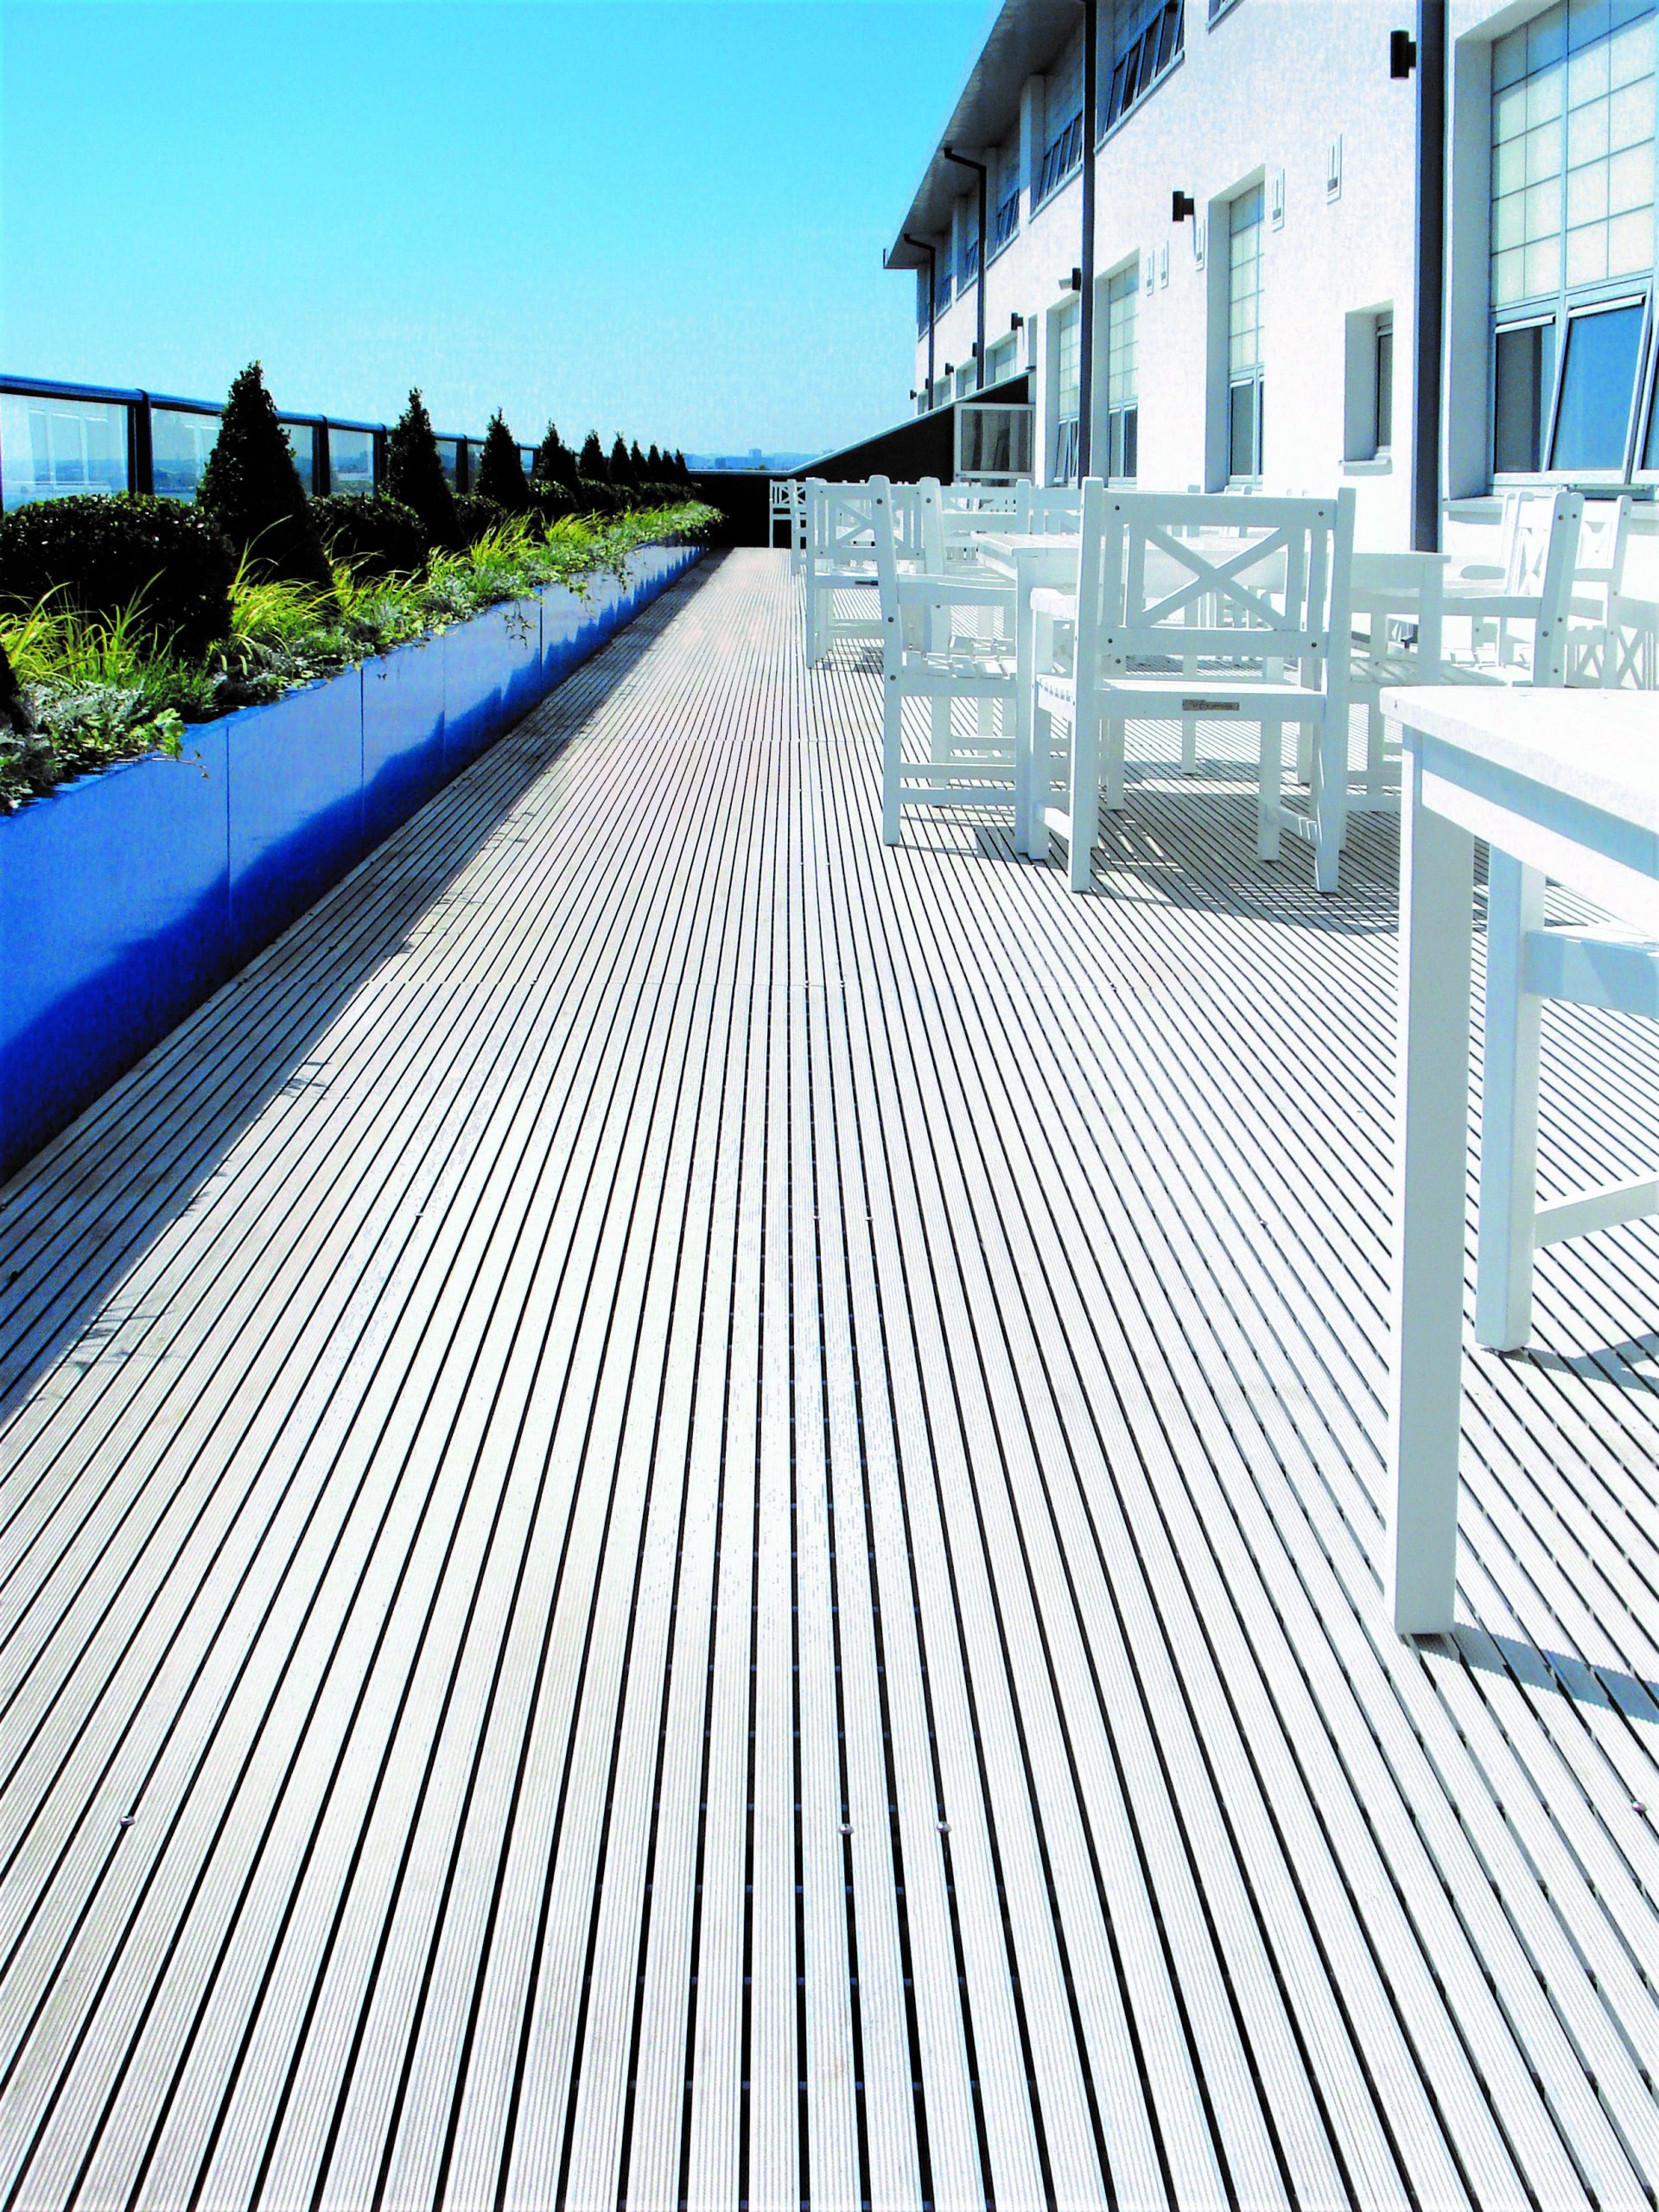 Future-Proof Your Projects With A1 Fire Rated Decking @neaconews